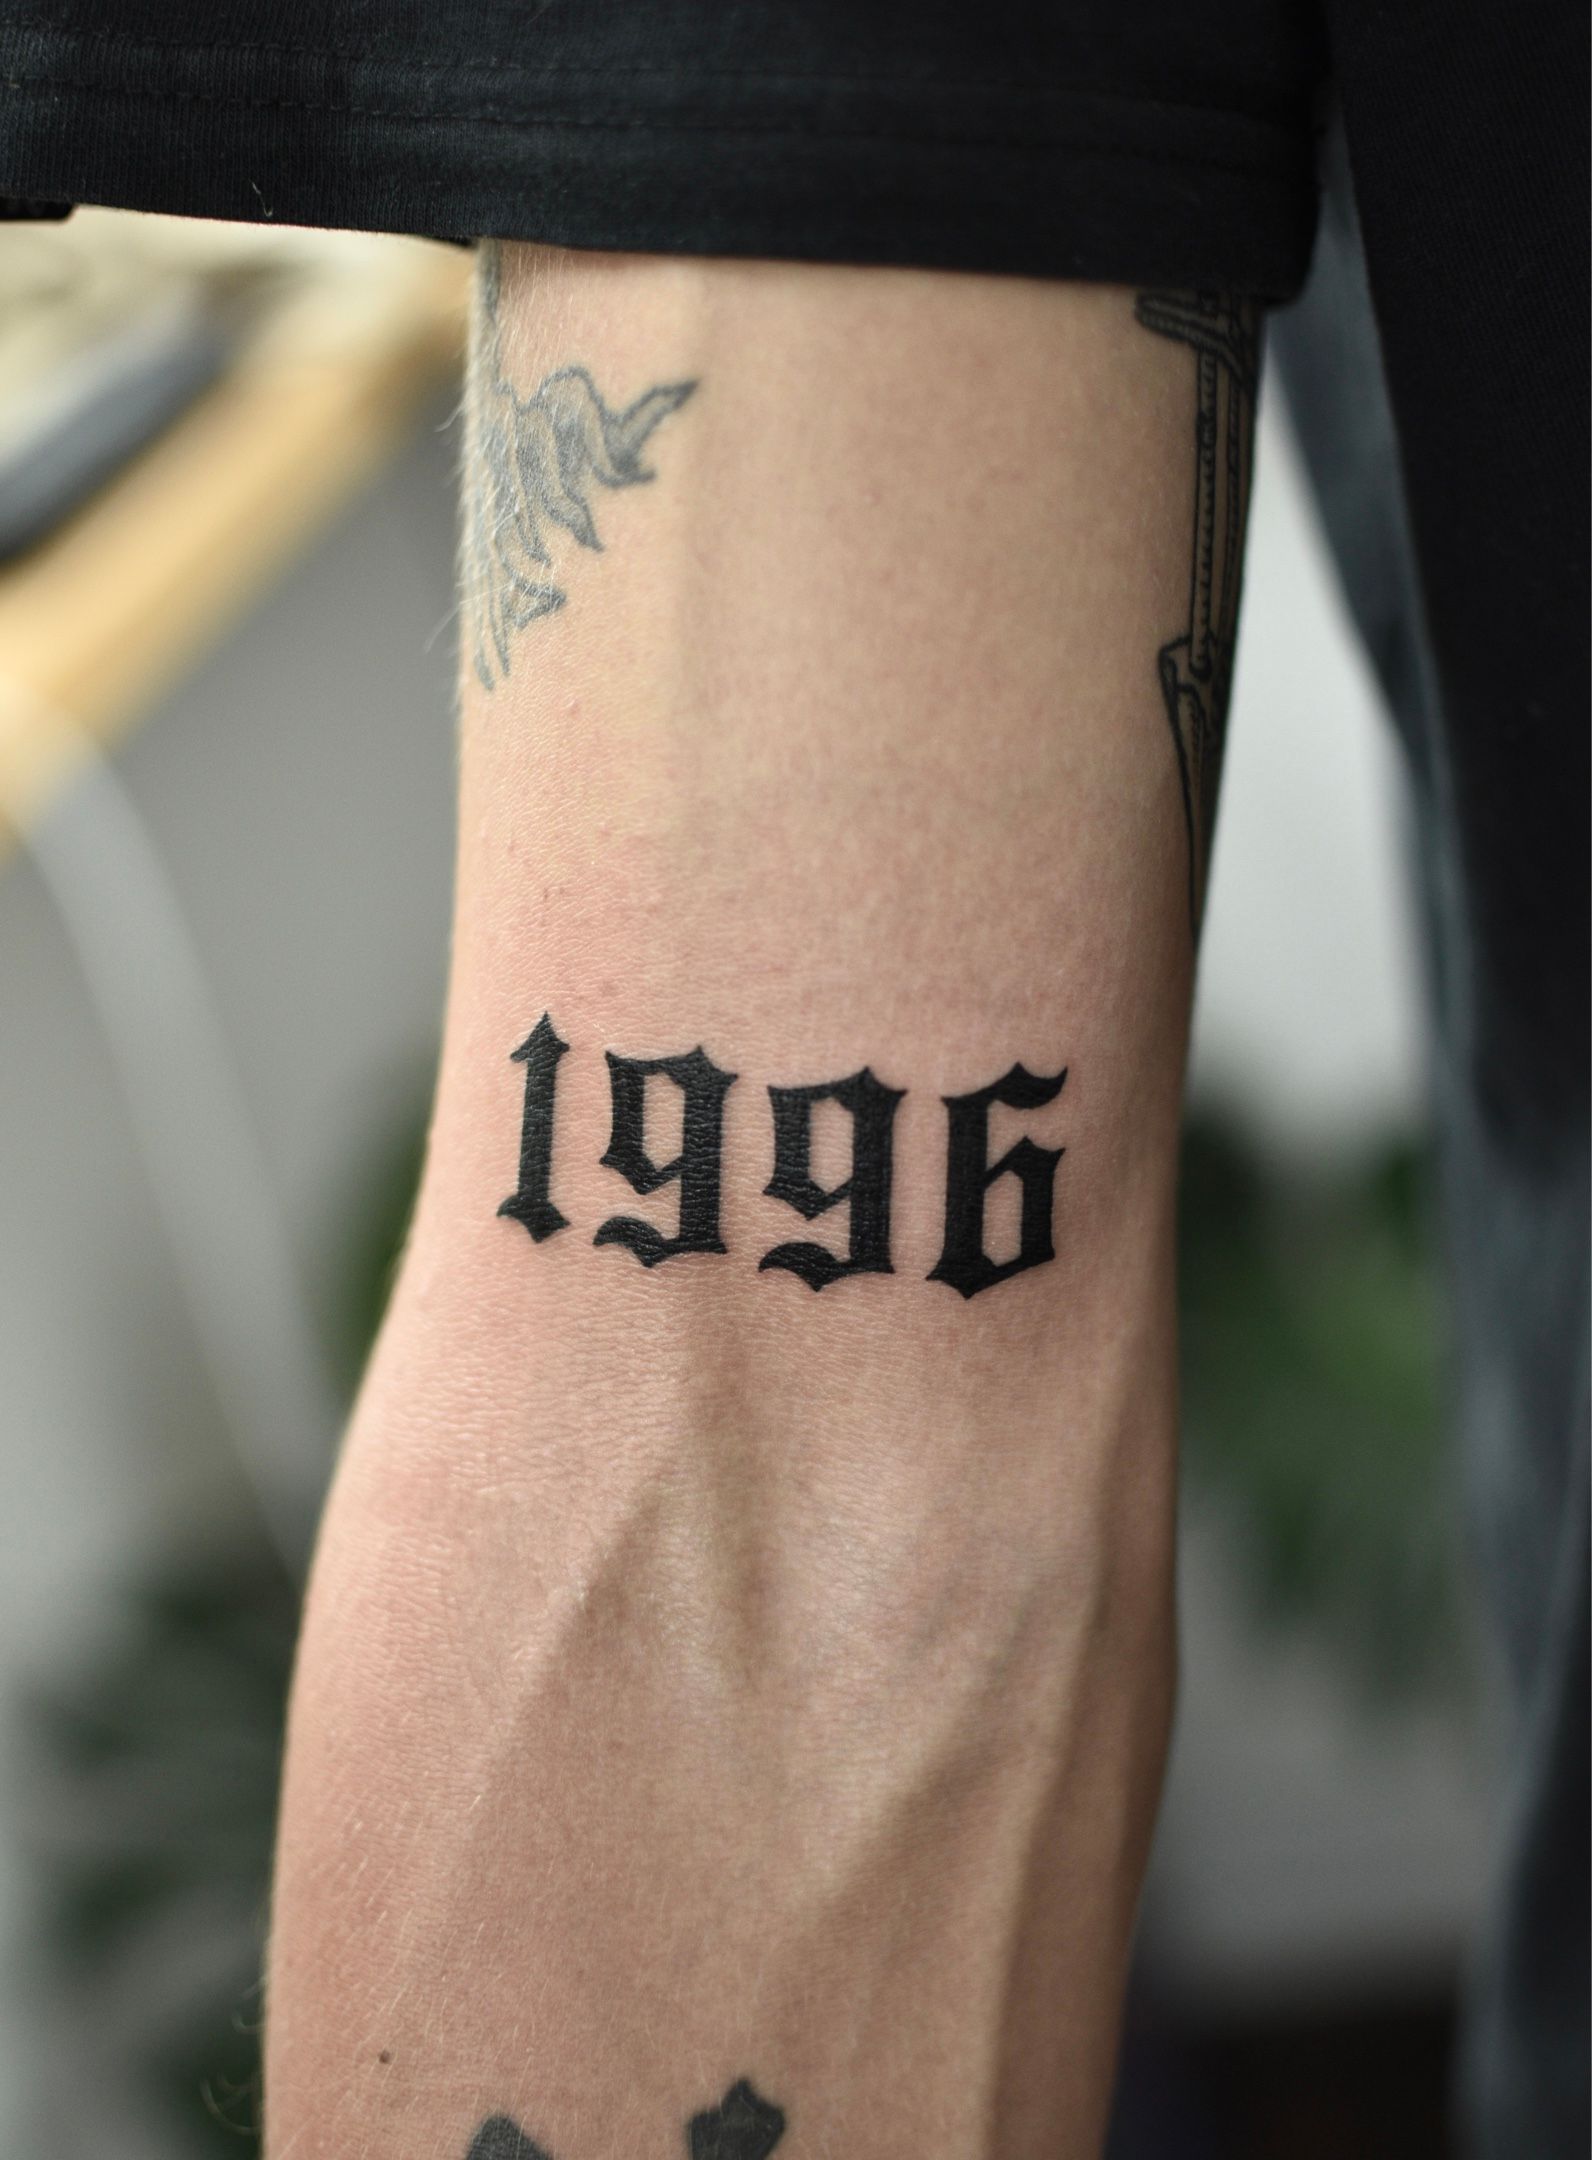 Tattoo tagged with small birth year chang mathematical tiny date  ifttt little blackwork wrist lettering medium size 1960 number   inkedappcom